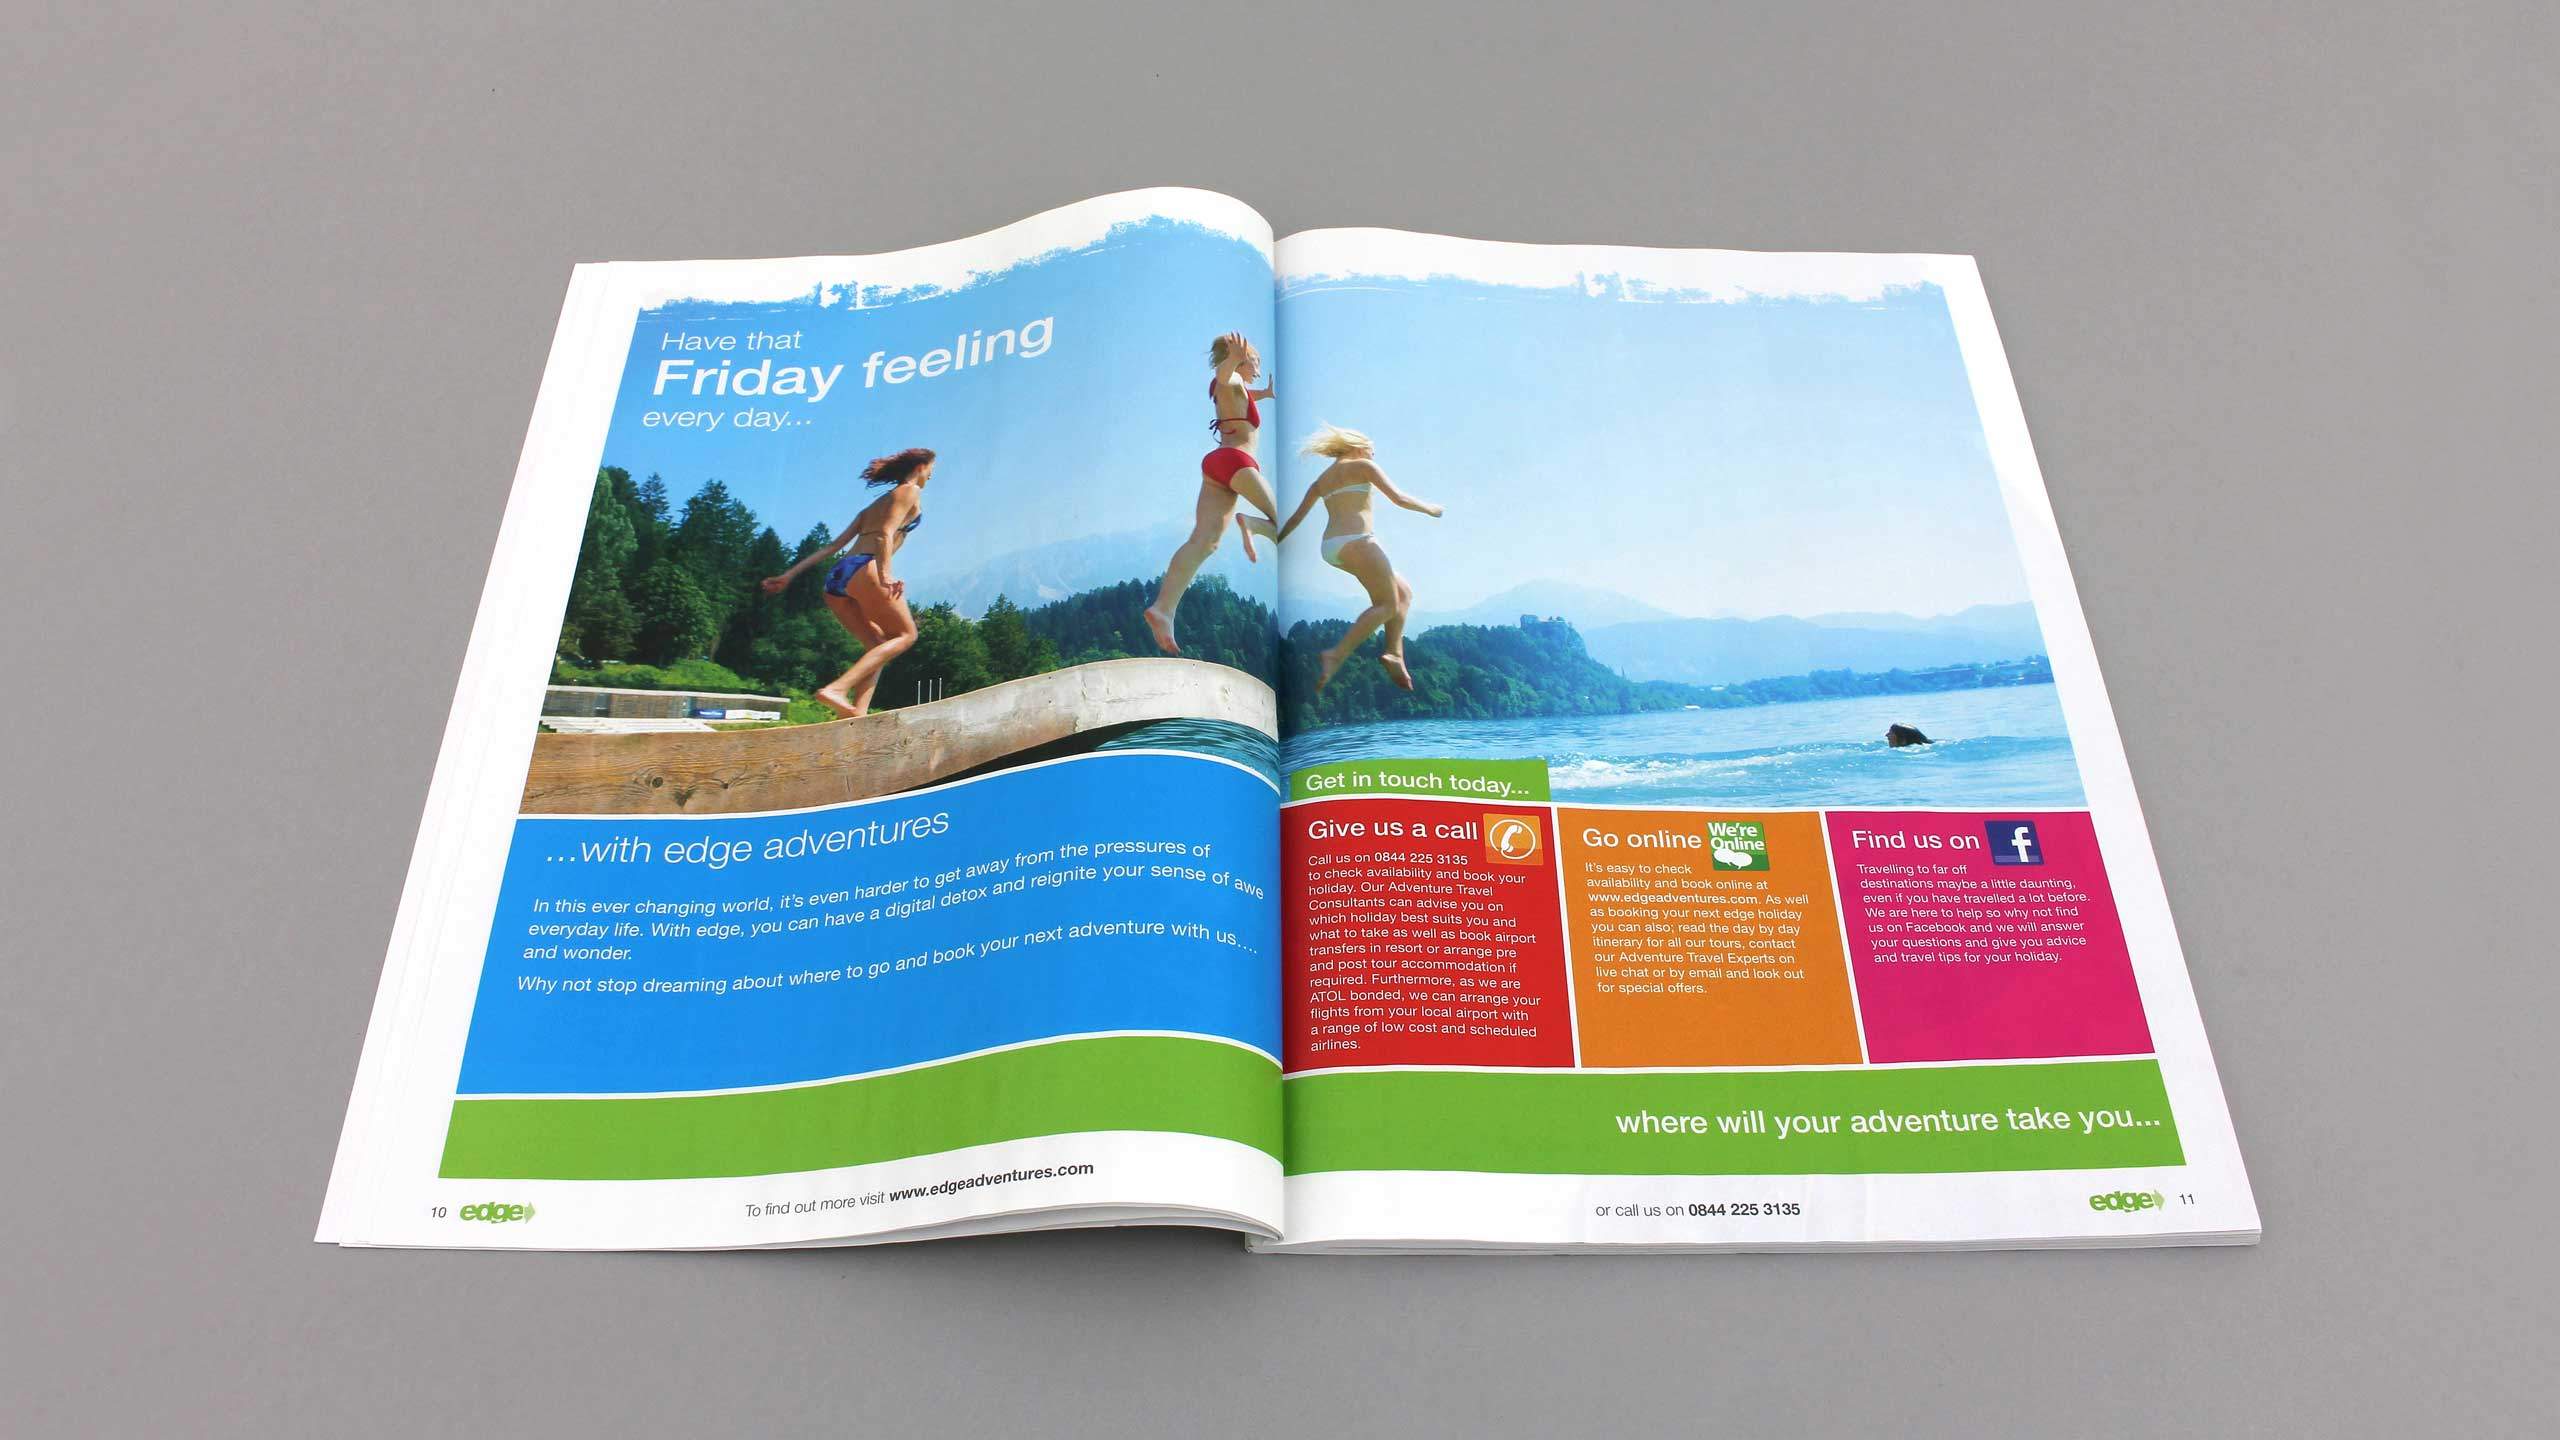 18-30 travel brochure design that friday feeling pages edge adventure